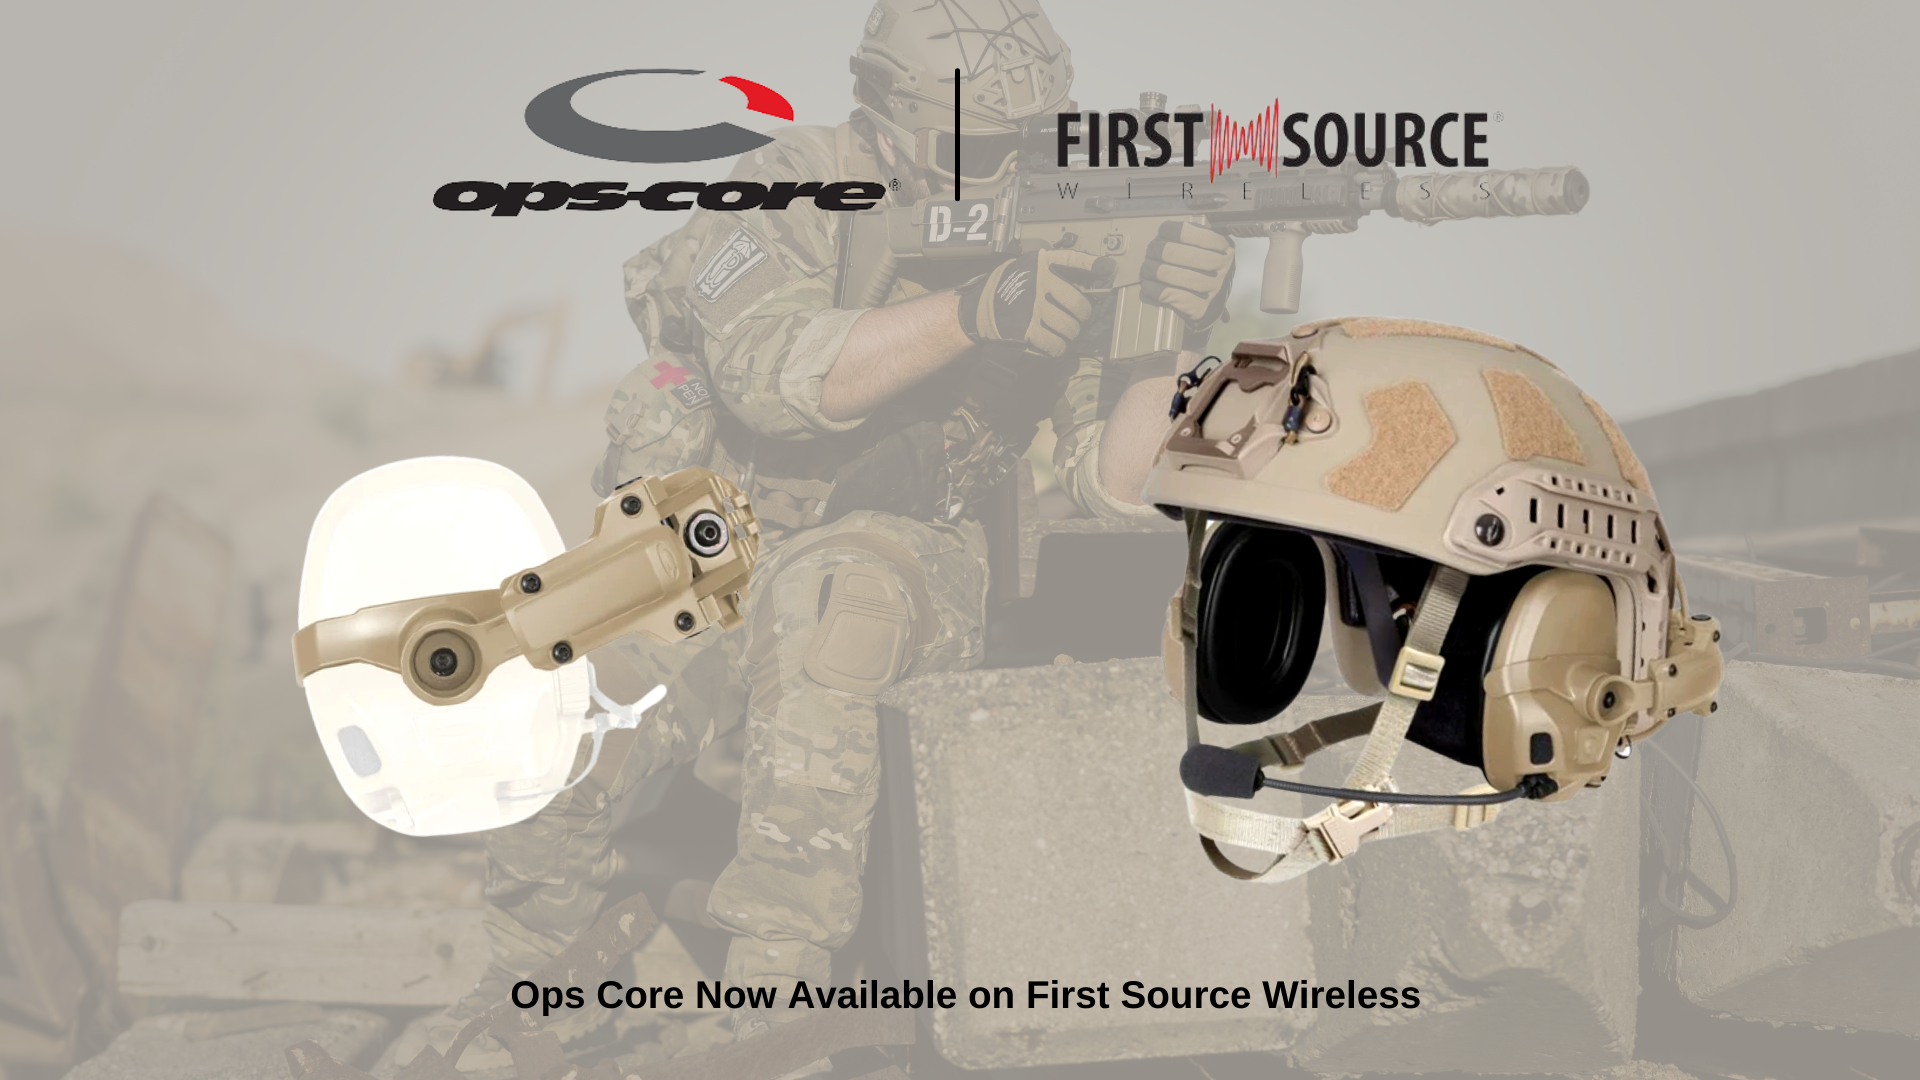 First Source Wireless Partners with Gentex Corporation, Introduces Ops Core Headsets